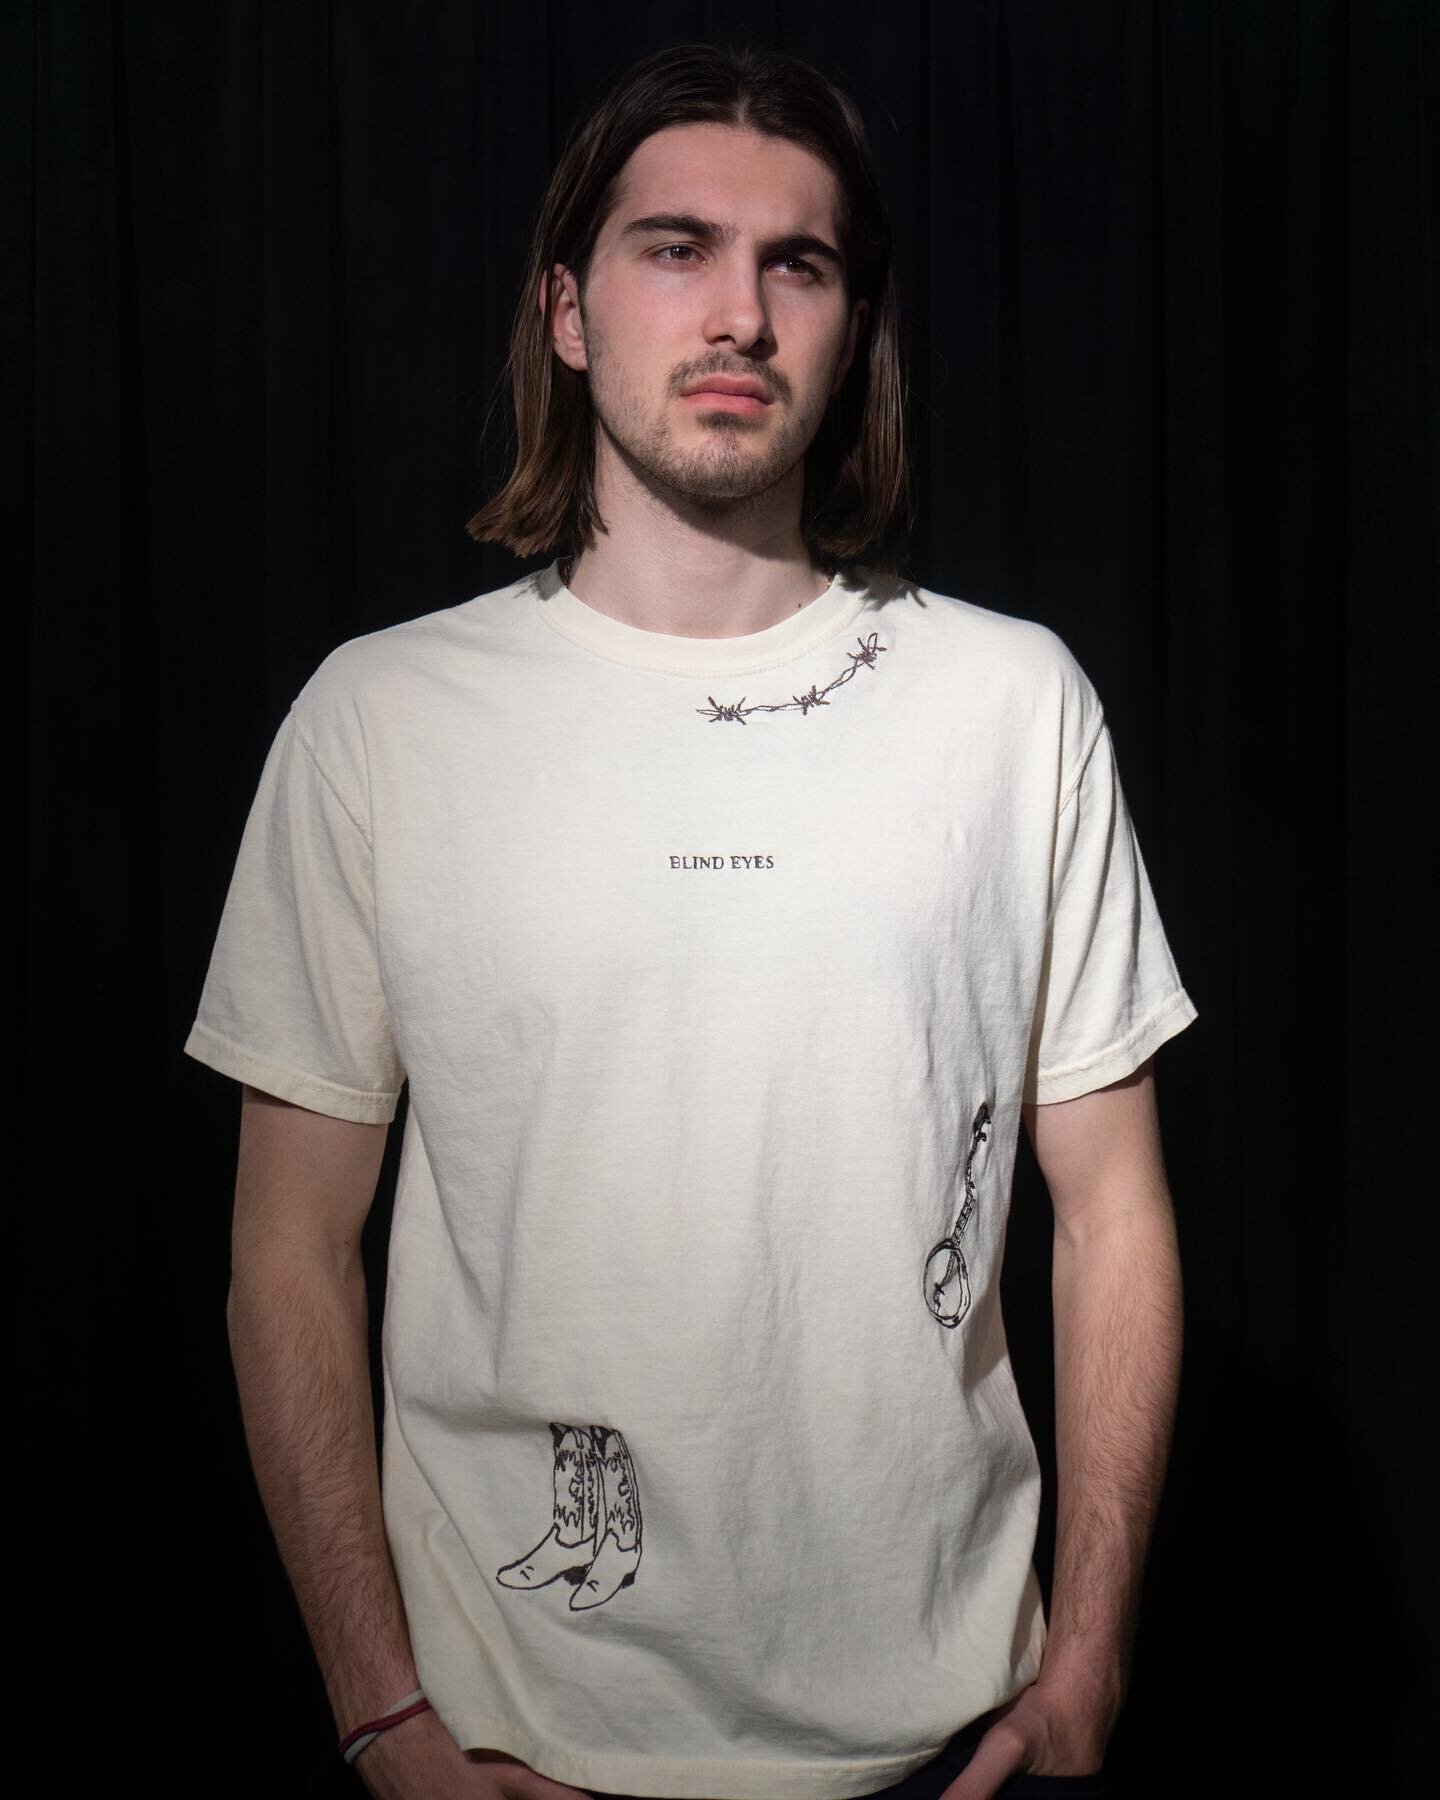 &ldquo;Sketchbook&rdquo; T-Shirt now available online - $39